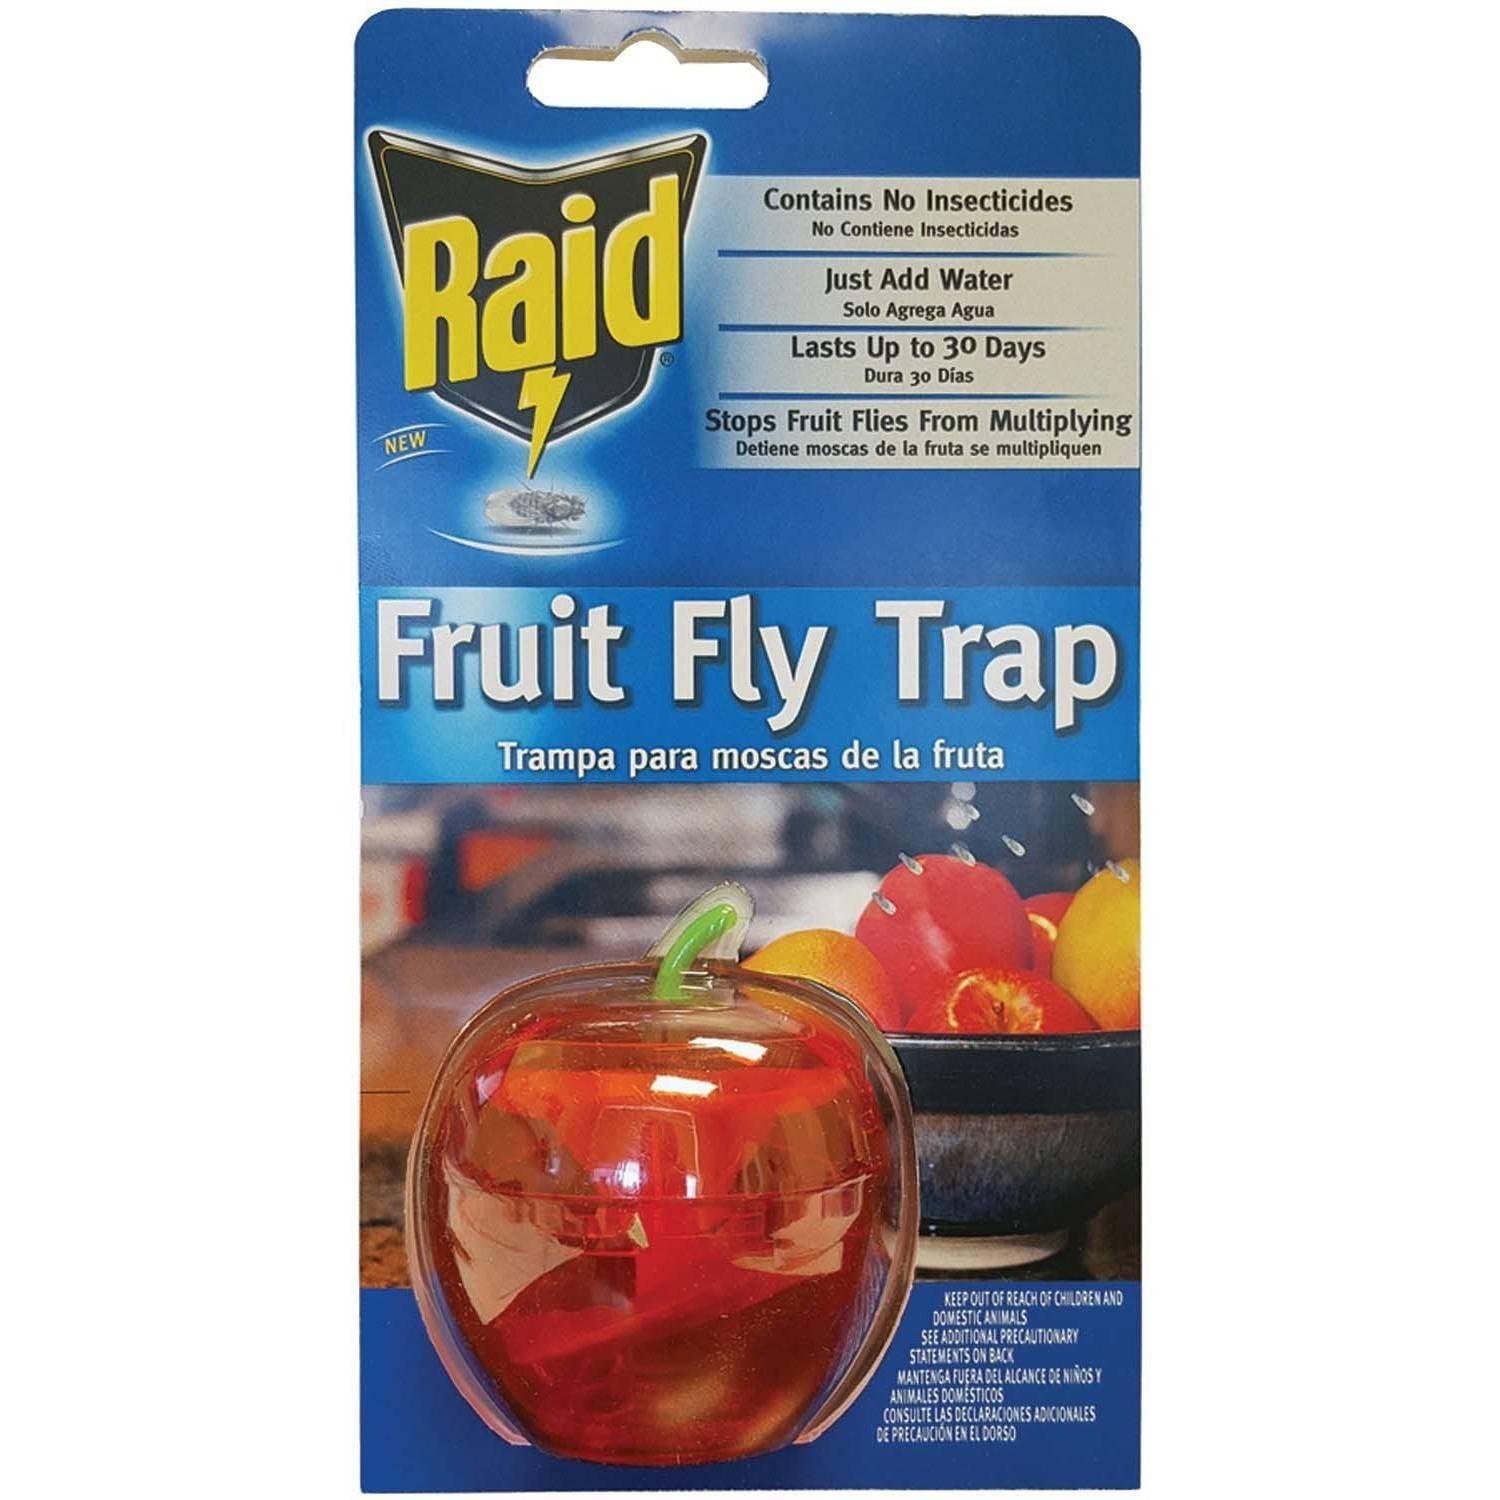 The Best Home Made Fruit Fly Trap (with proof) 